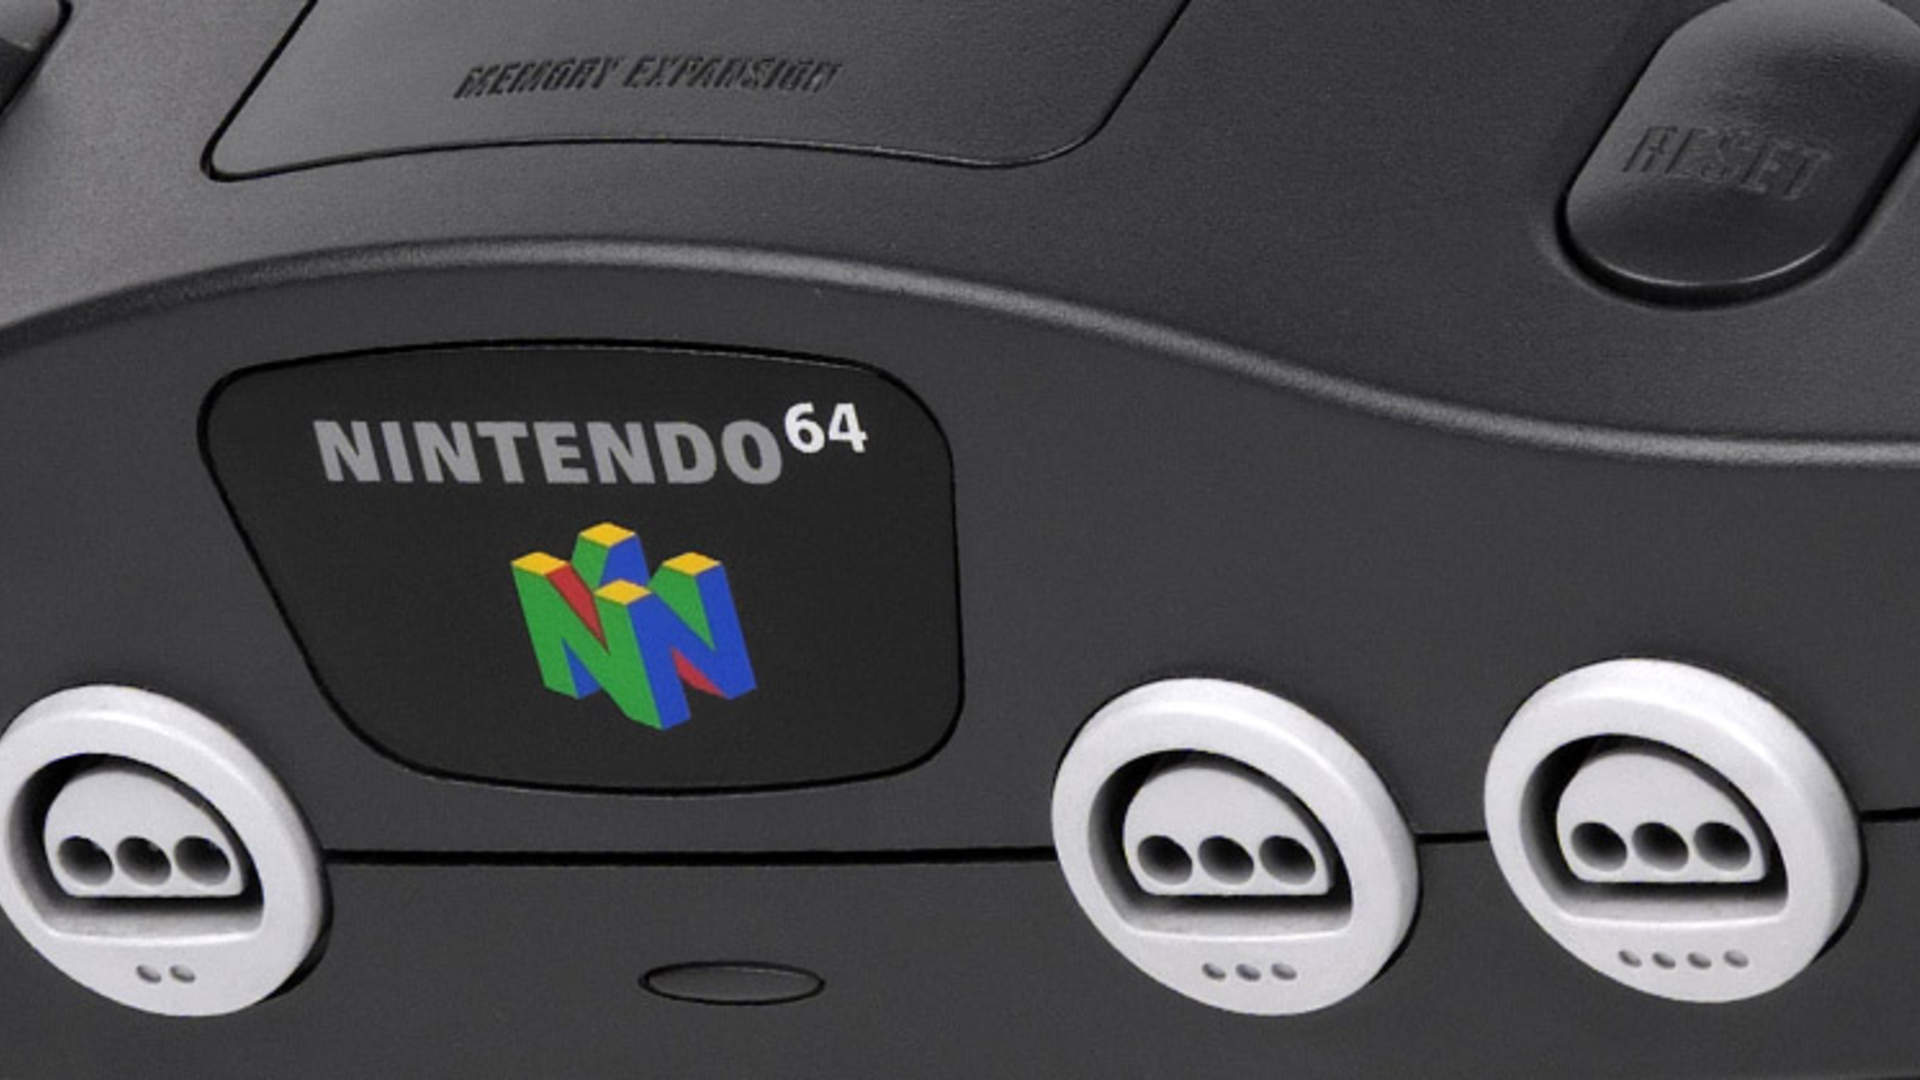 N64 Classic Mini N64 Mini Could be the Best Retro Console With the Best Games Will N64 Classic Cost? Possible N64 Mini Release Date